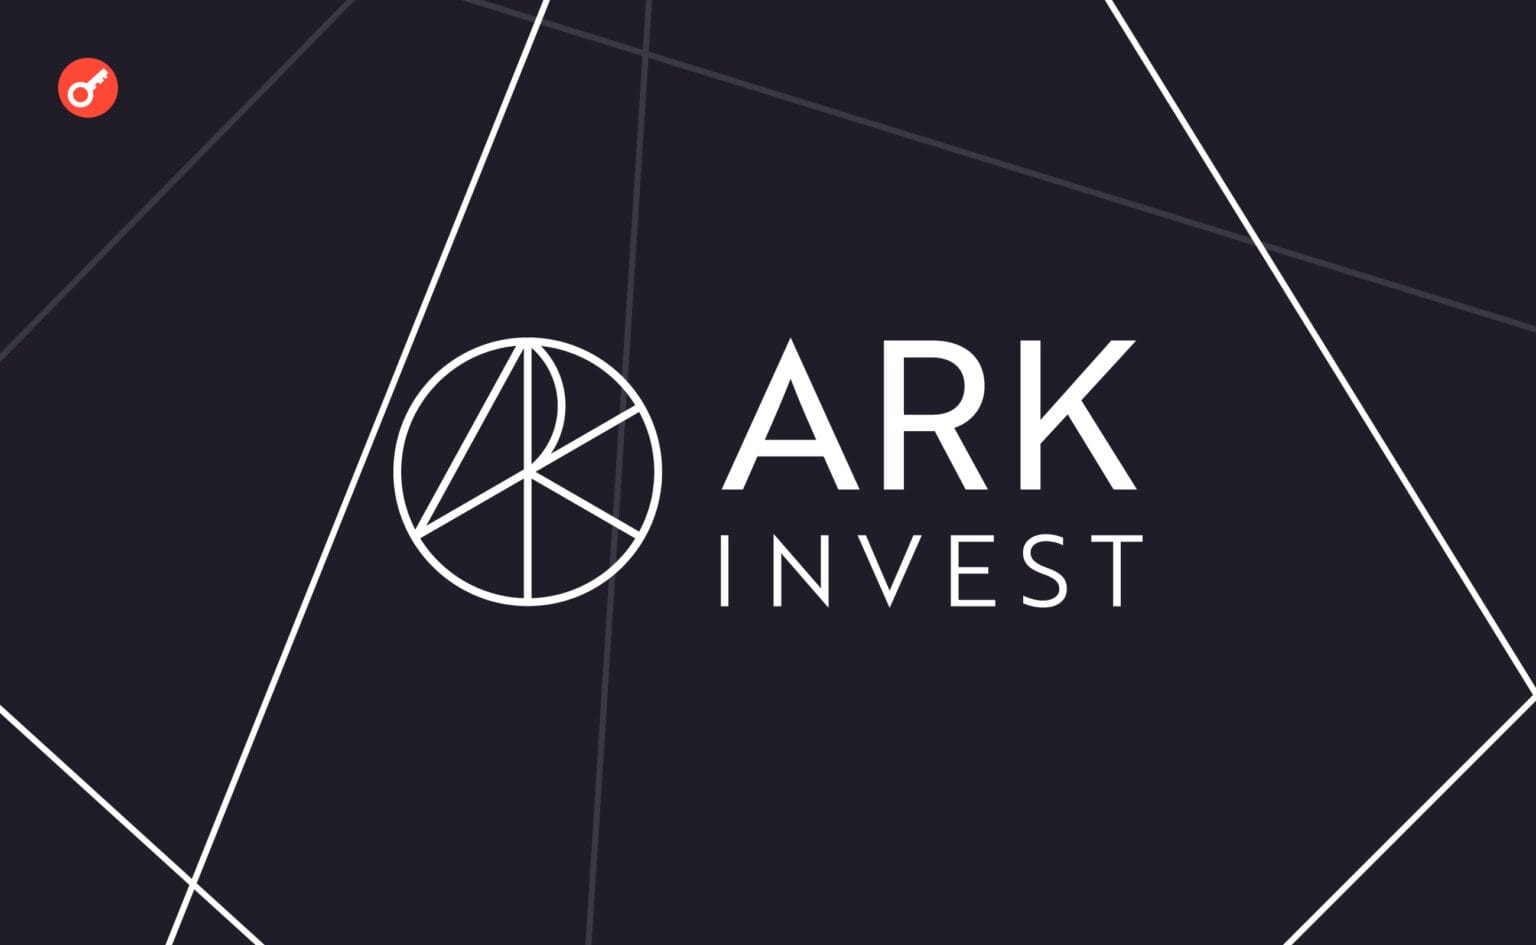 CEO of Ark Invest stated that bitcoin surpasses gold as a hedge asset